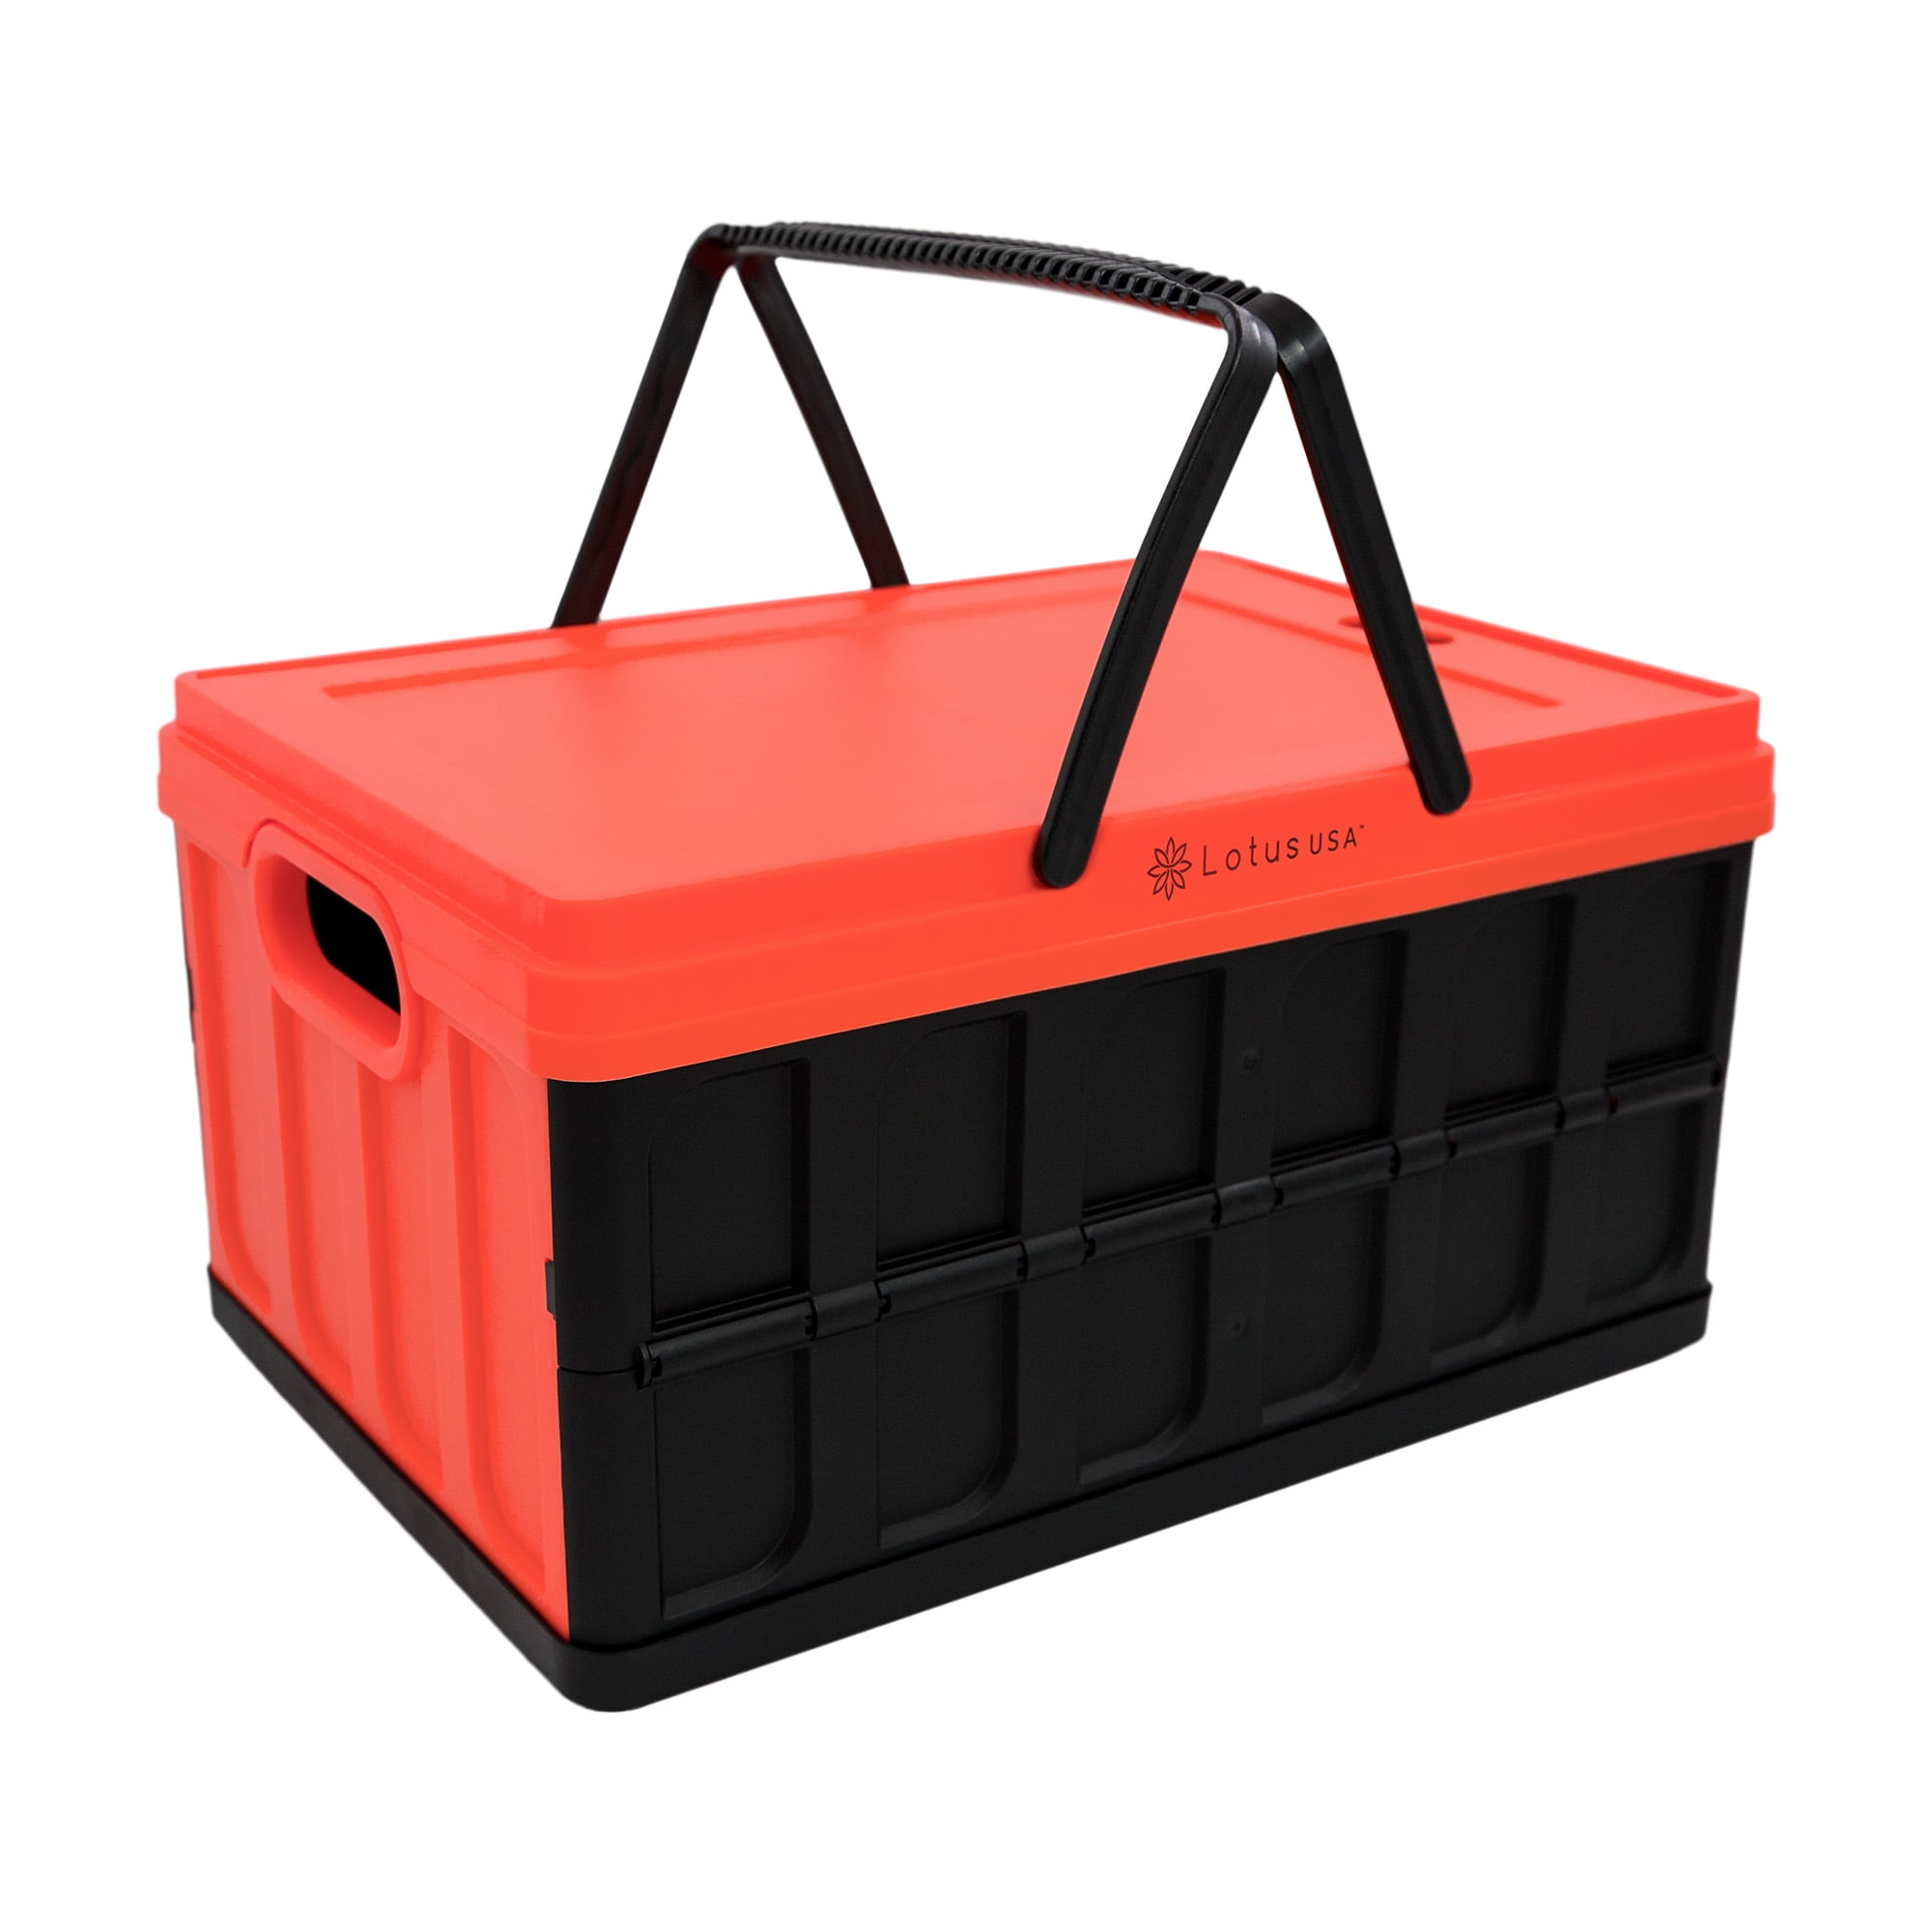 Lotus USA Foldable Stackable Hardside Storage Crate Red and Black 48 Quart 2-Pack 